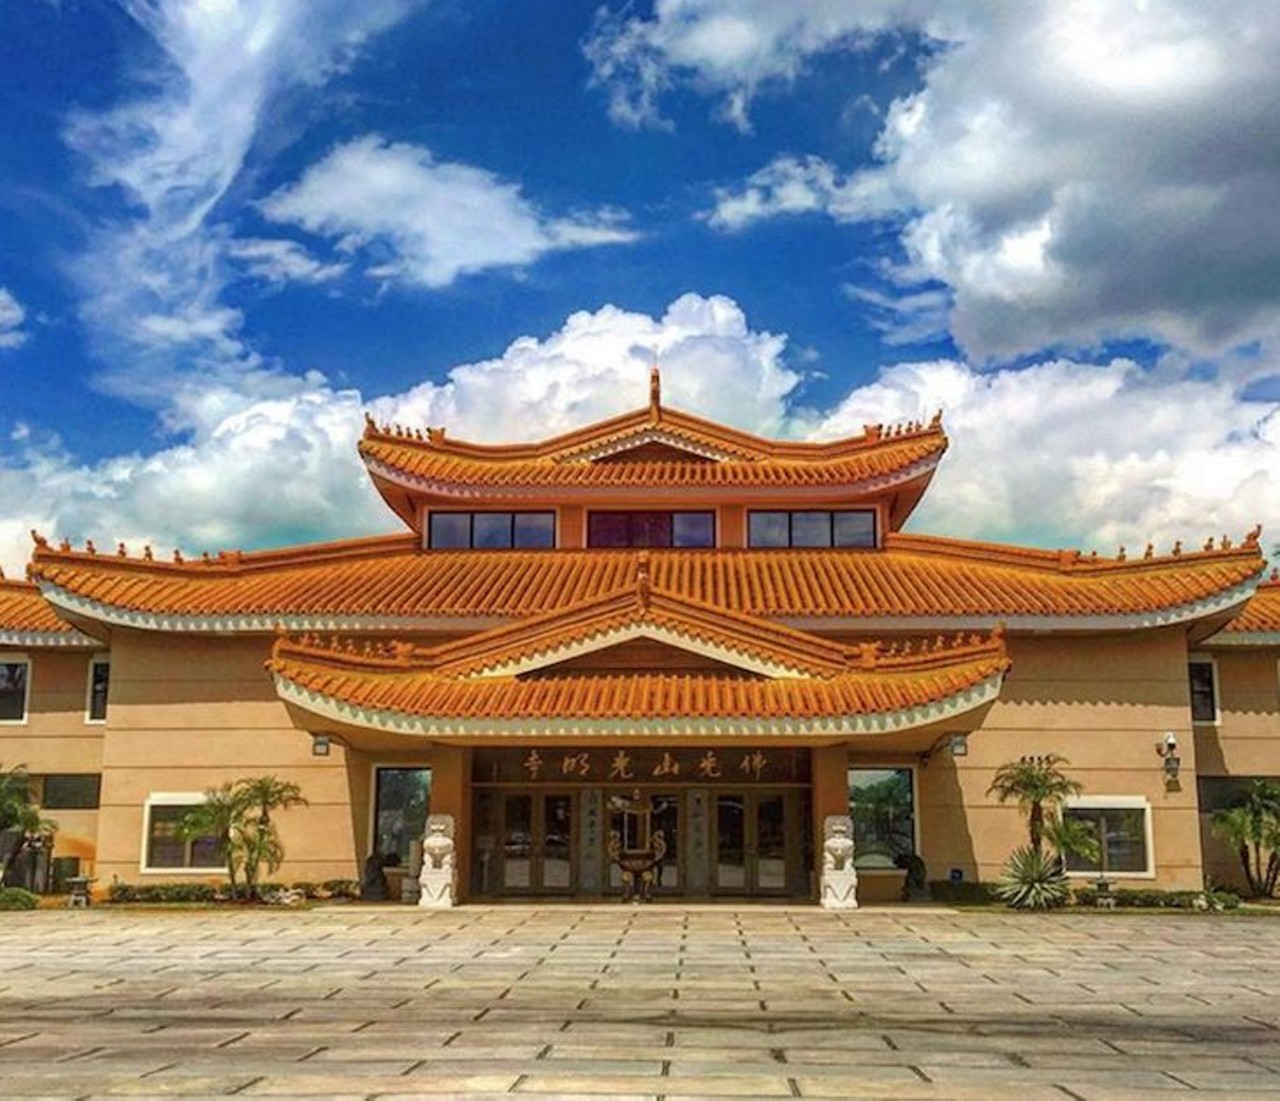 Saturday, Oct. 7 
Moon Festival
Buddhist festival with tea, moon cake, meditation, music and more. 
6 p.m.; Guang Ming Temple, 6555 Hoffner Road; 
orlandobuddhism.org
Photo via x_arrzam/Instagram